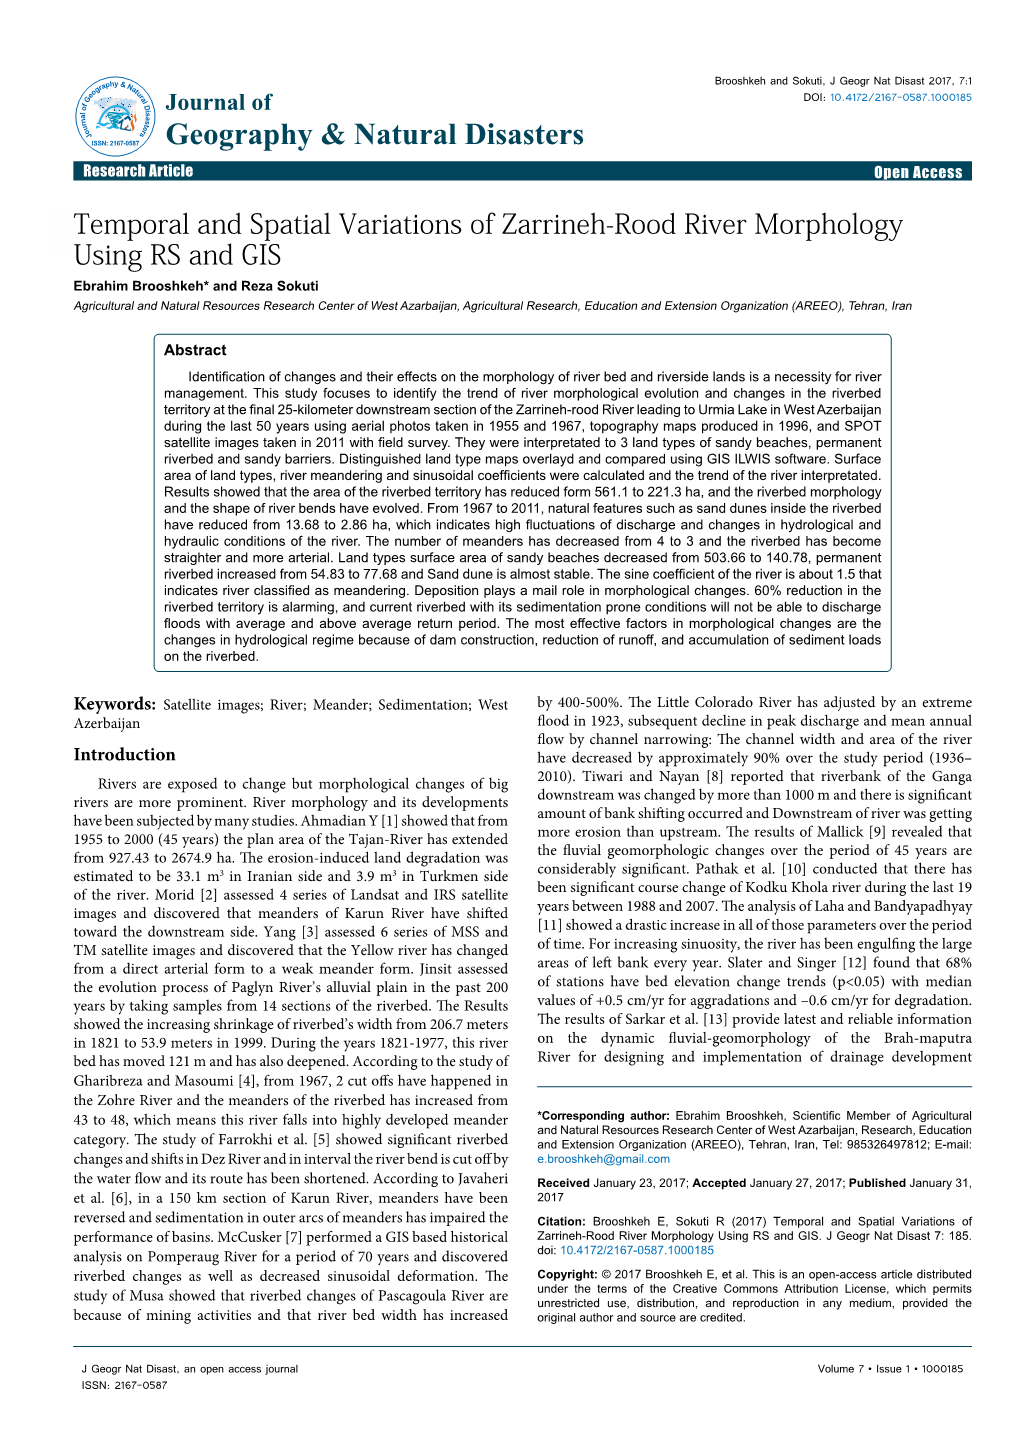 Temporal and Spatial Variations of Zarrineh-Rood River Morphology Using RS And